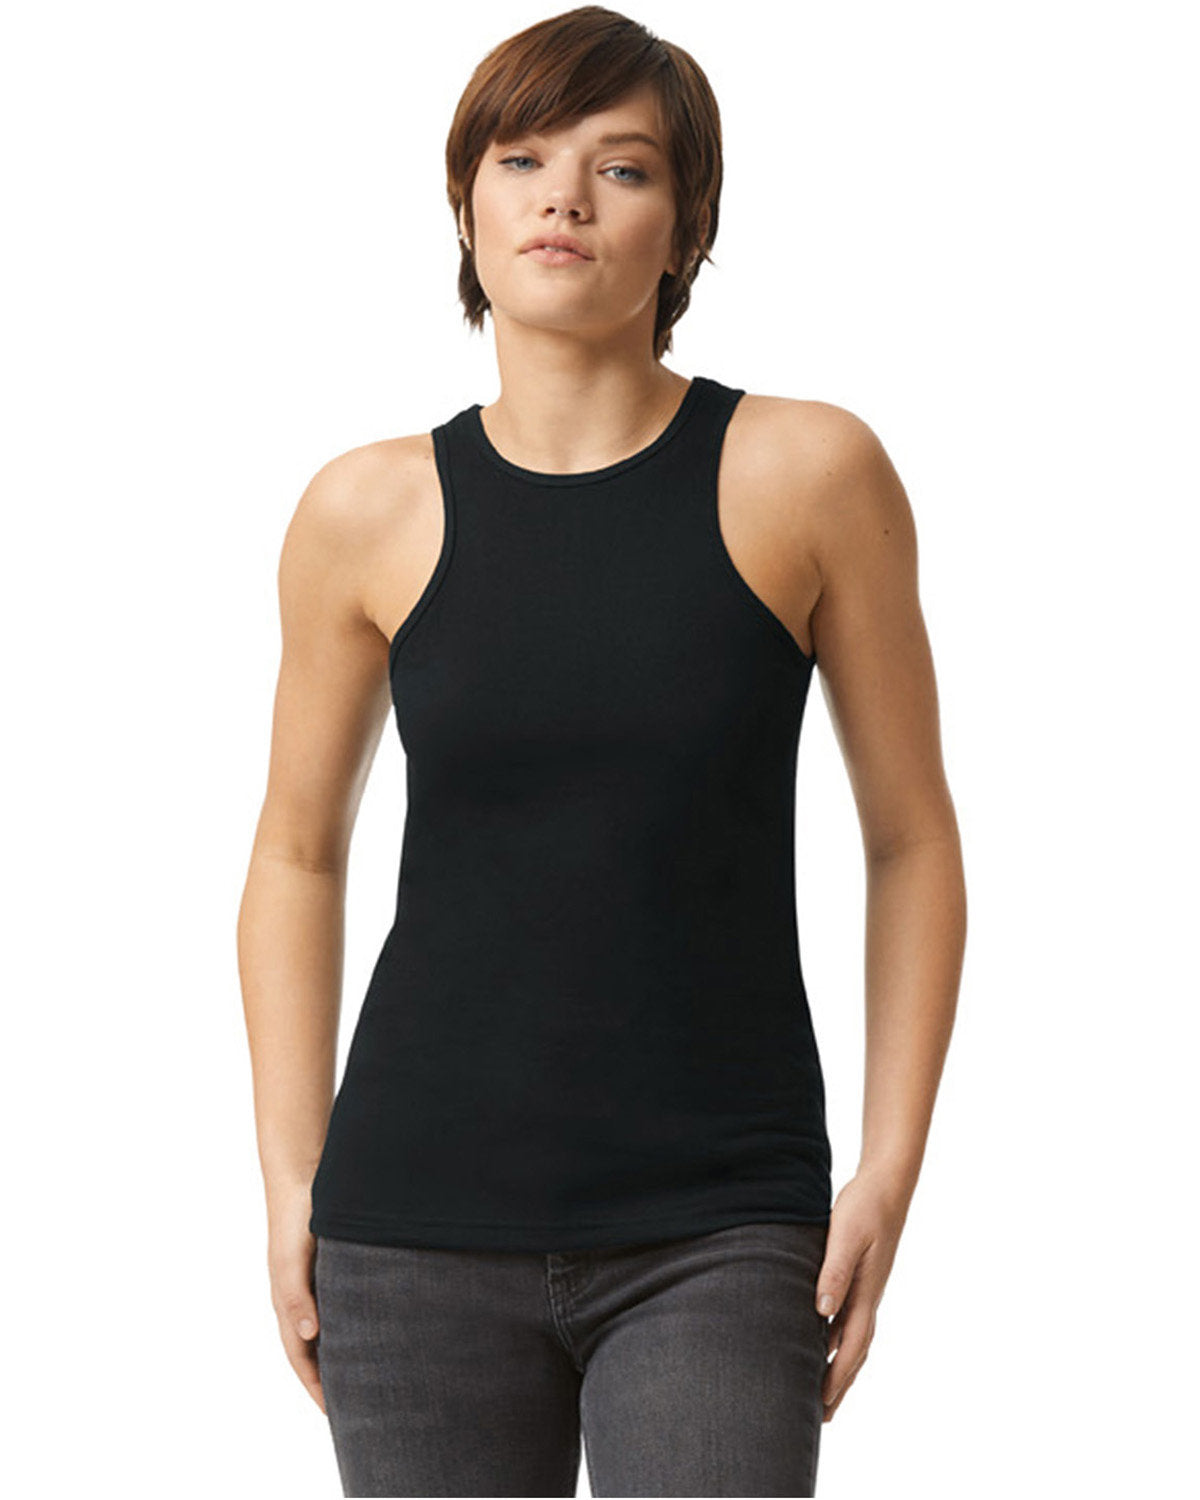 American Apparel Ladies' CVC Racerback Tank: Redefine Comfort and Style with Elegance